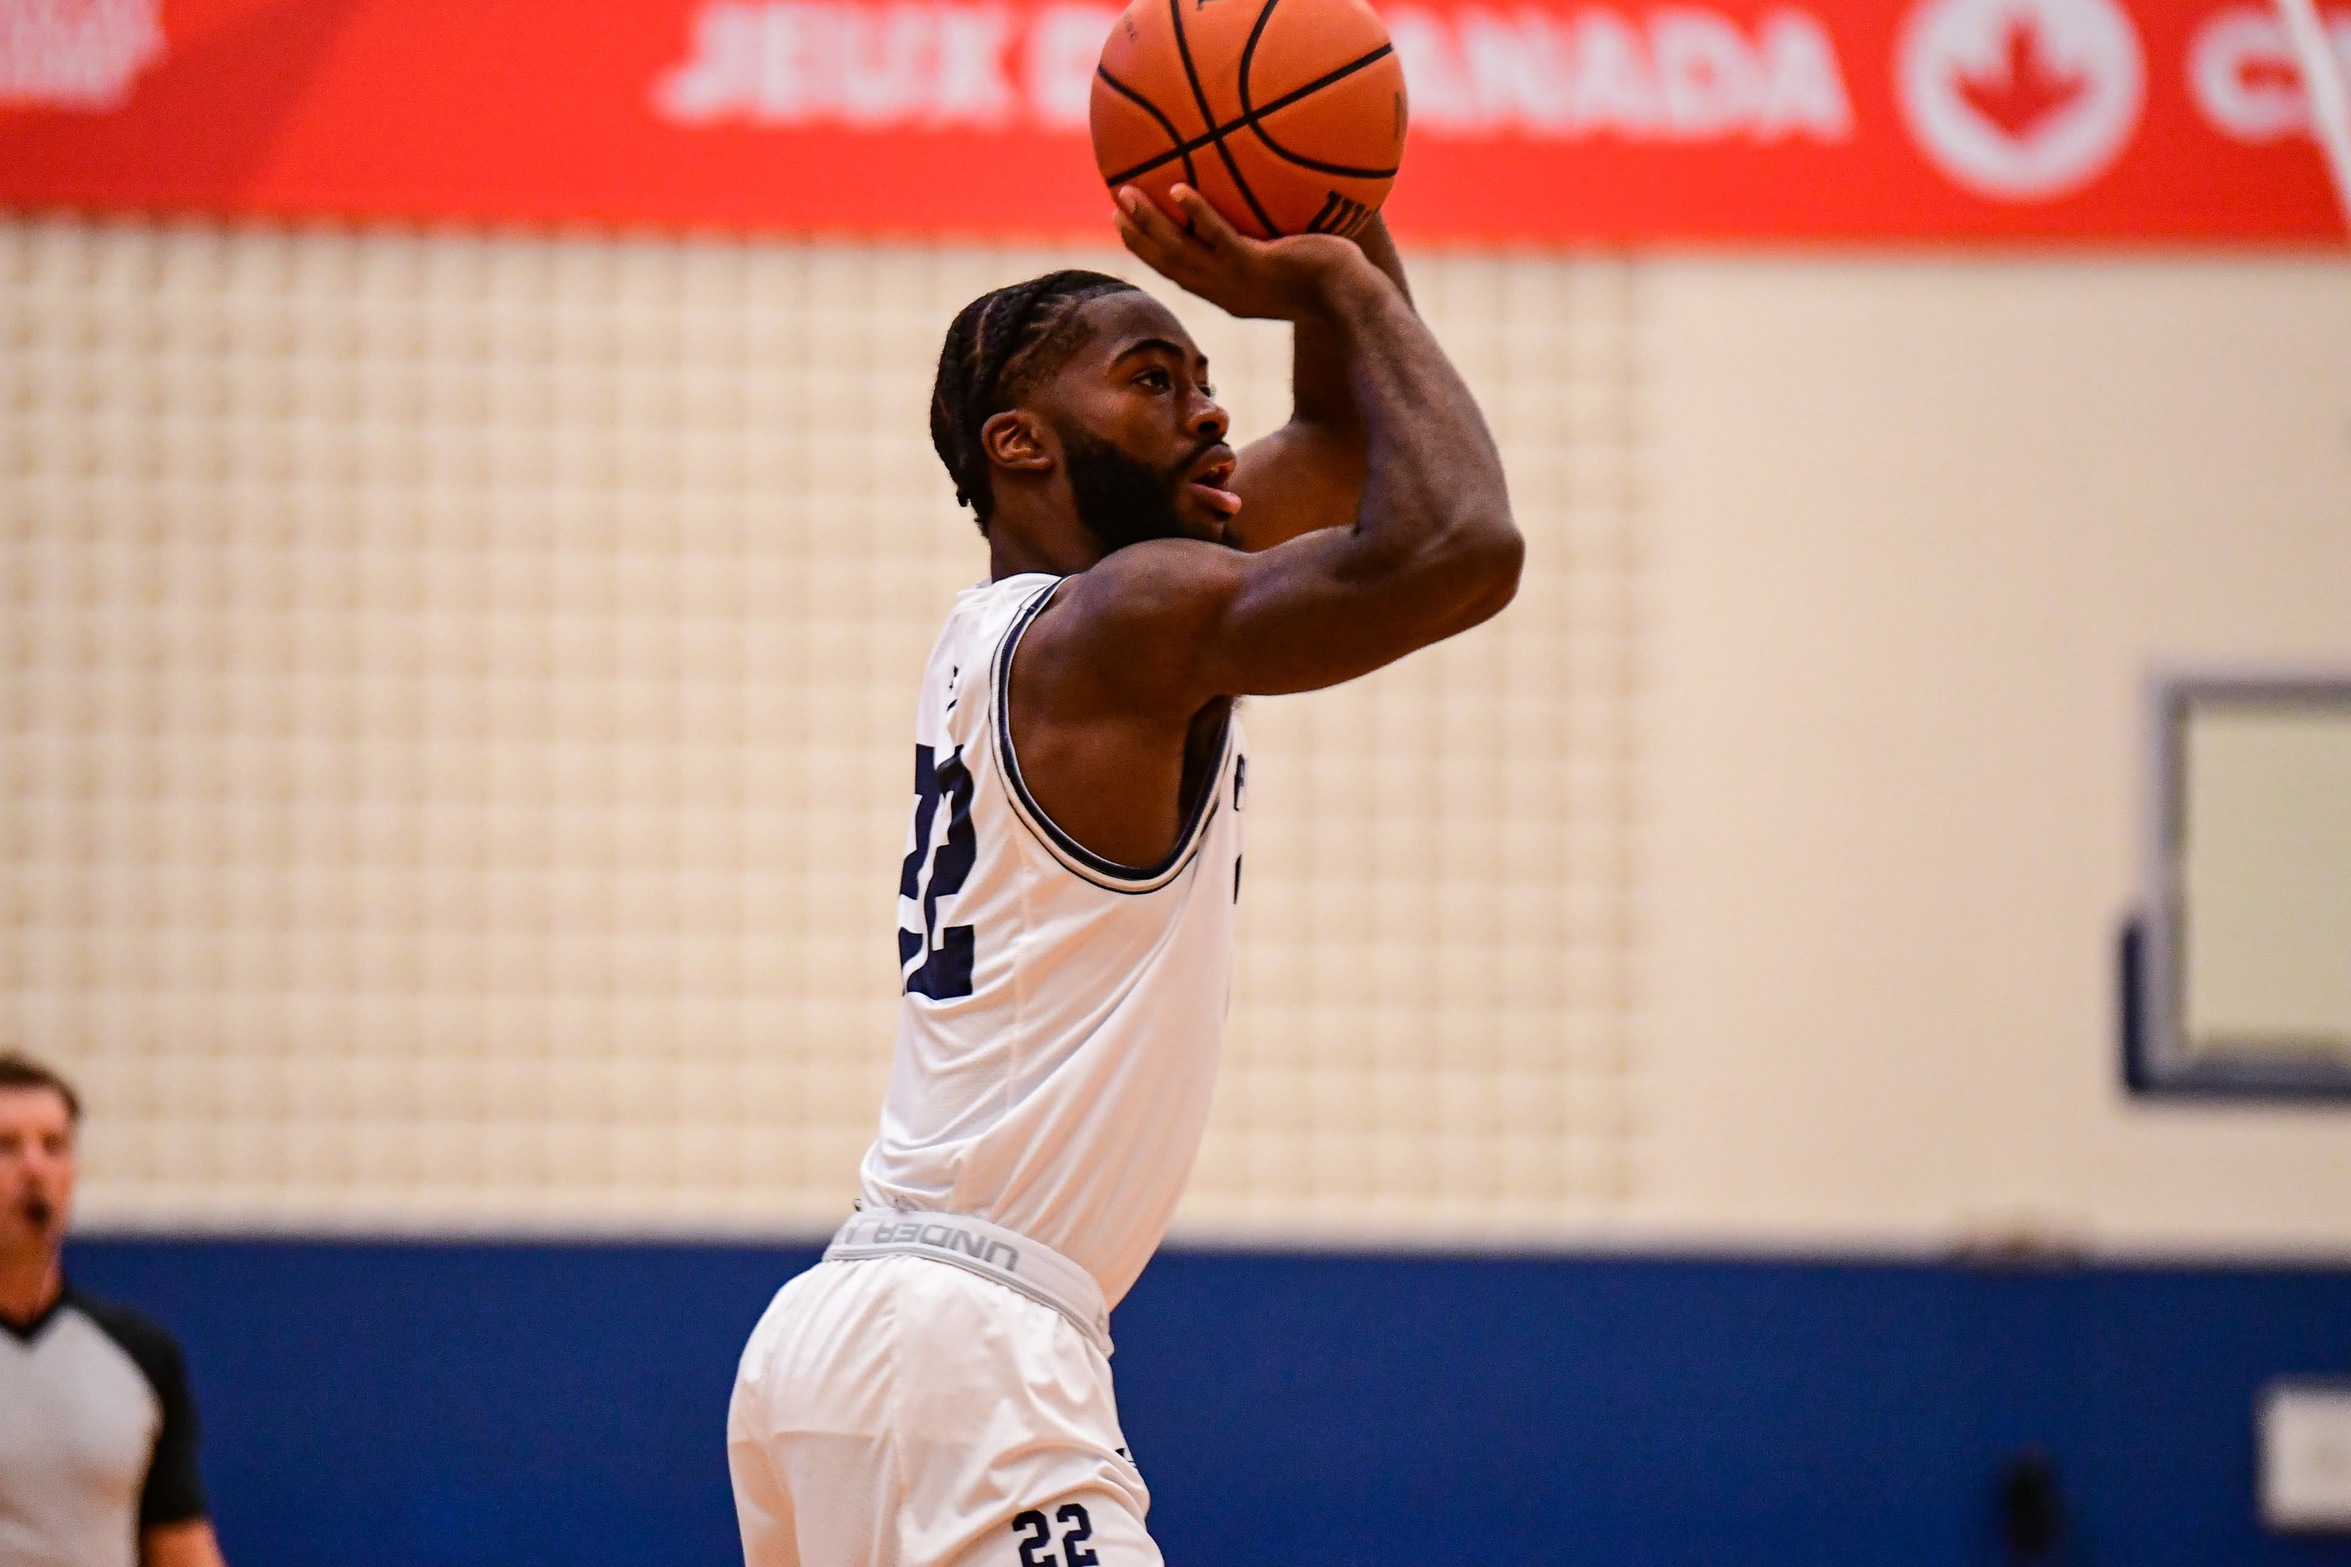 Knights Men’s basketball not able to pull off the win against the Fanshawe Falcons